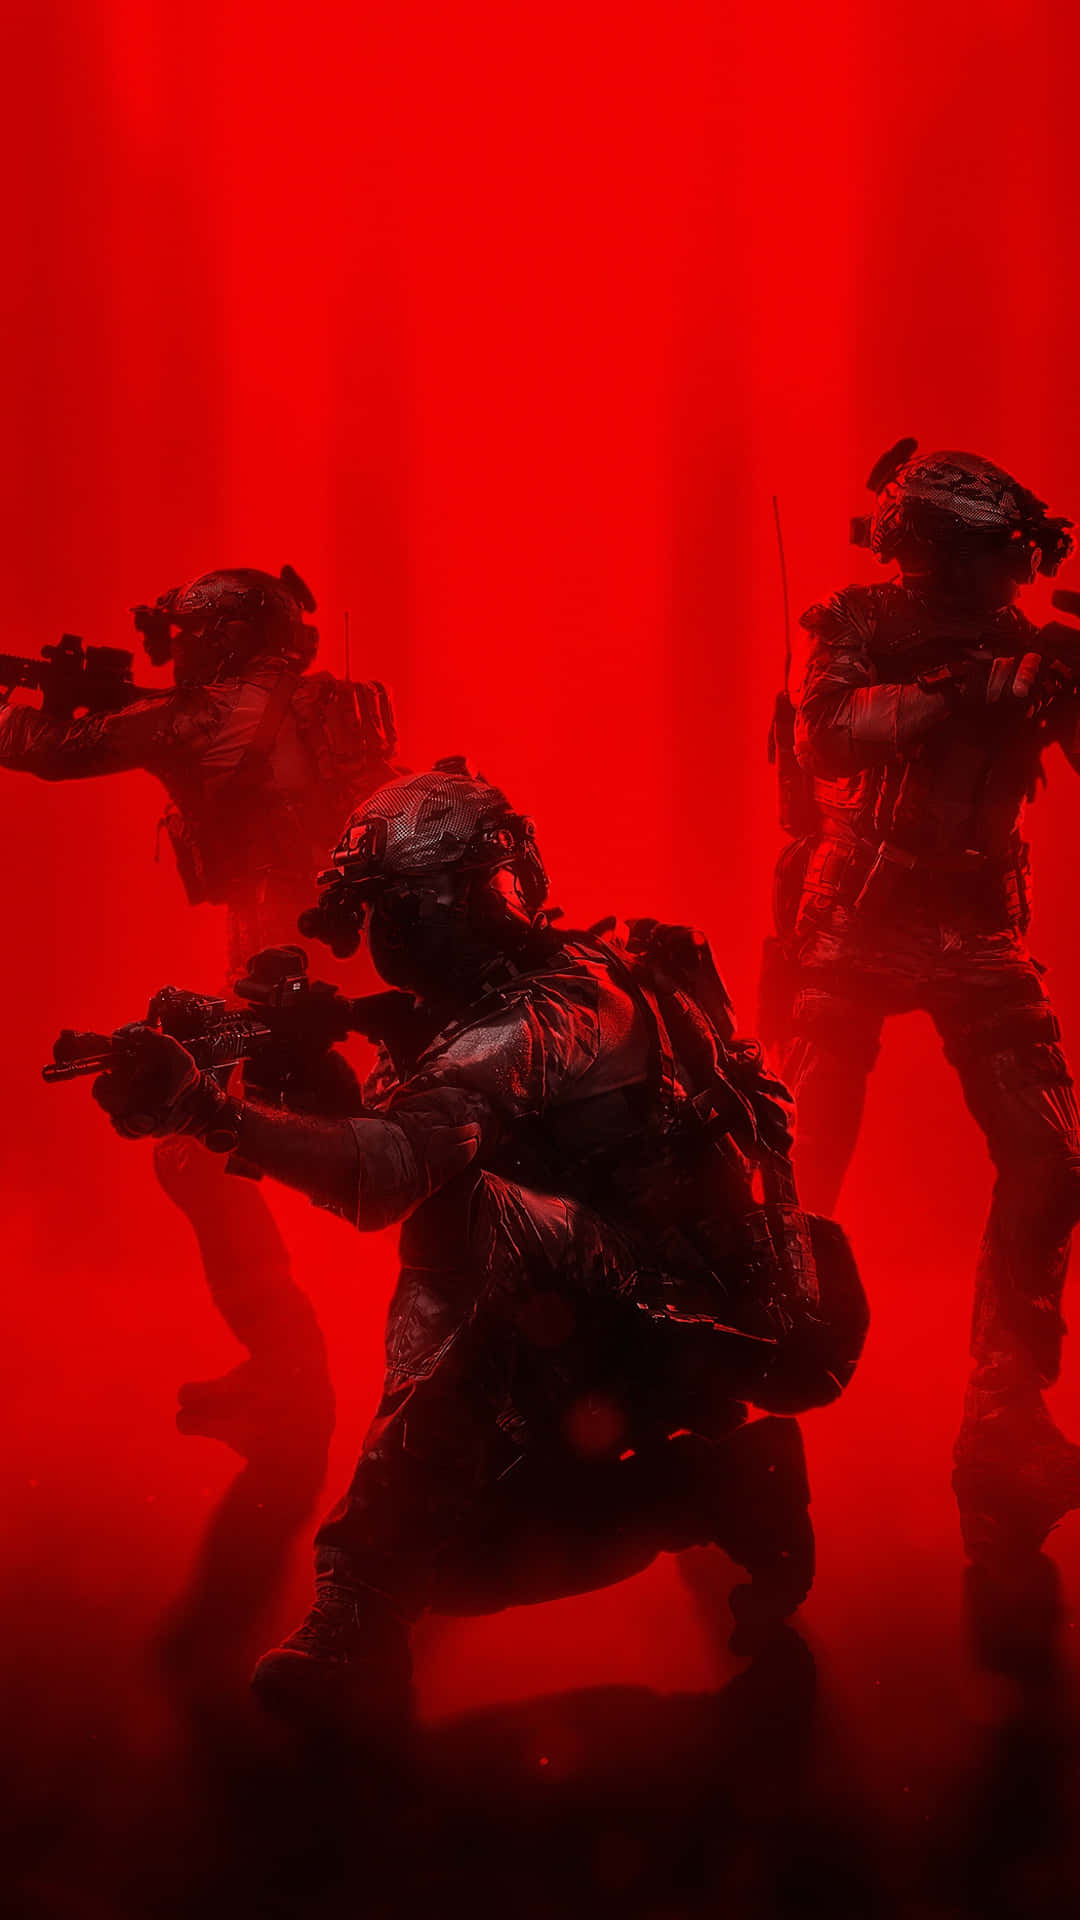 A Group Of Soldiers In Red And Black